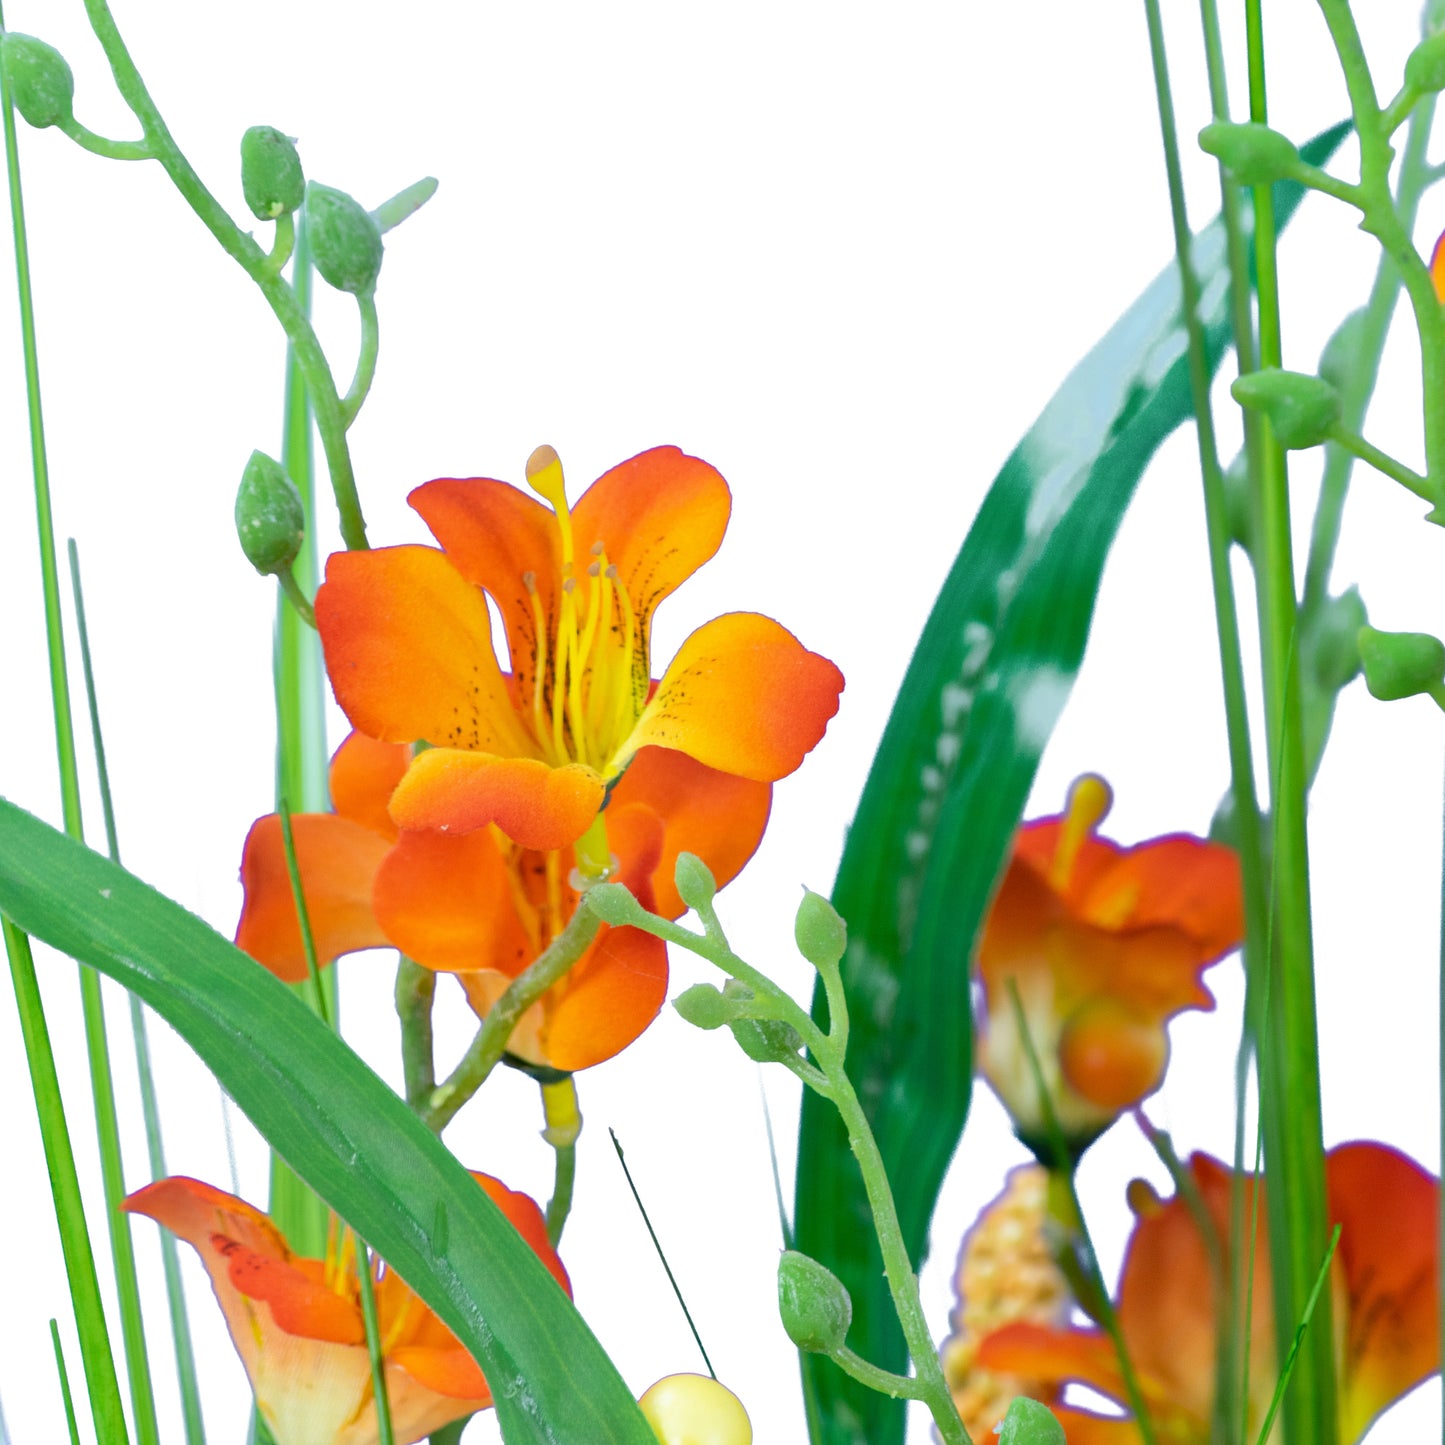 4 Feet High Artificial Reed with Decorative Orange Flowers